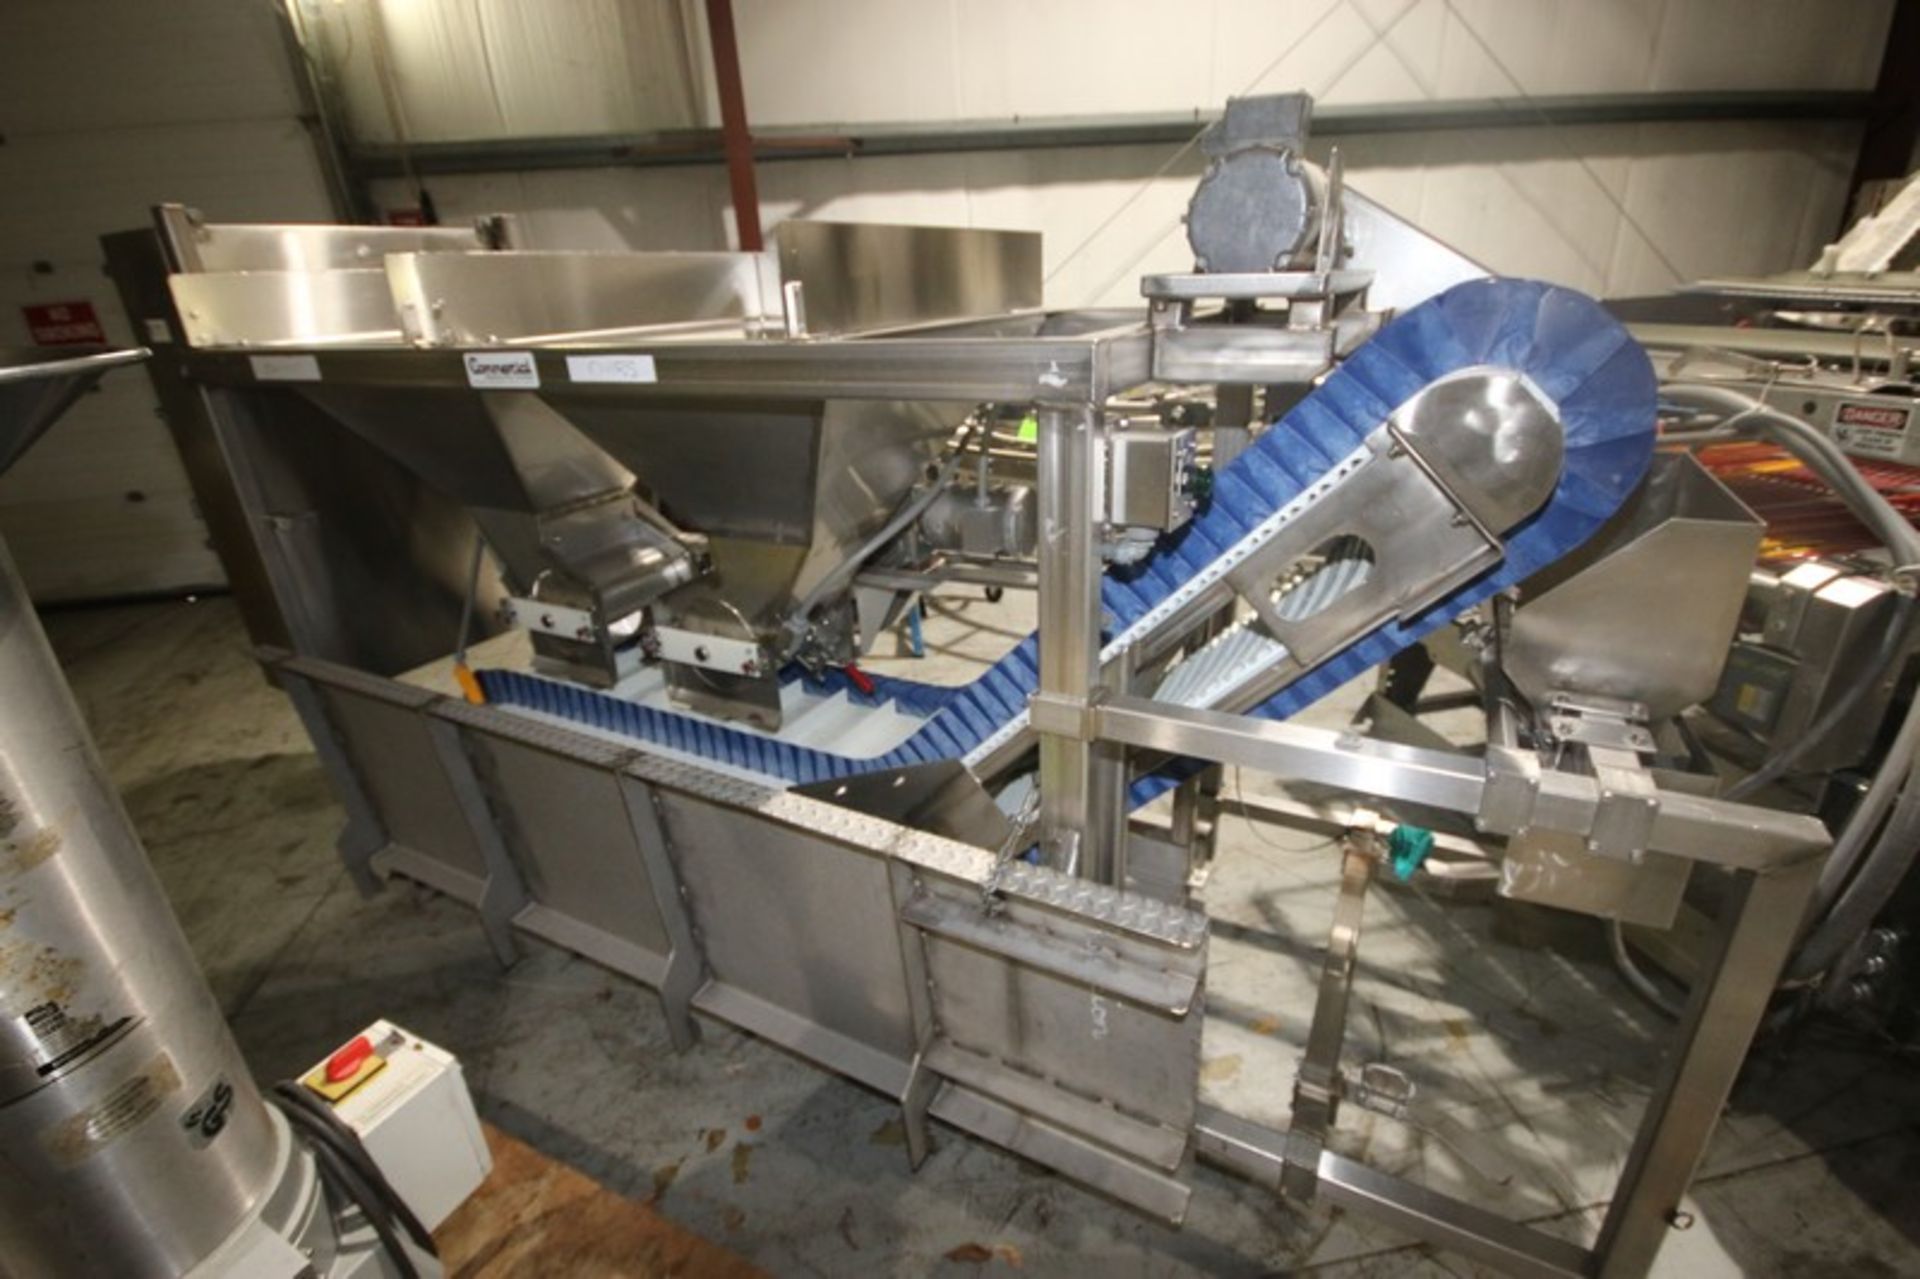 Commercial S/S Chips/Chunk Feeder Conveyor, S/N MU120310604, Job No.: 10604, with Flighted Conveyor,